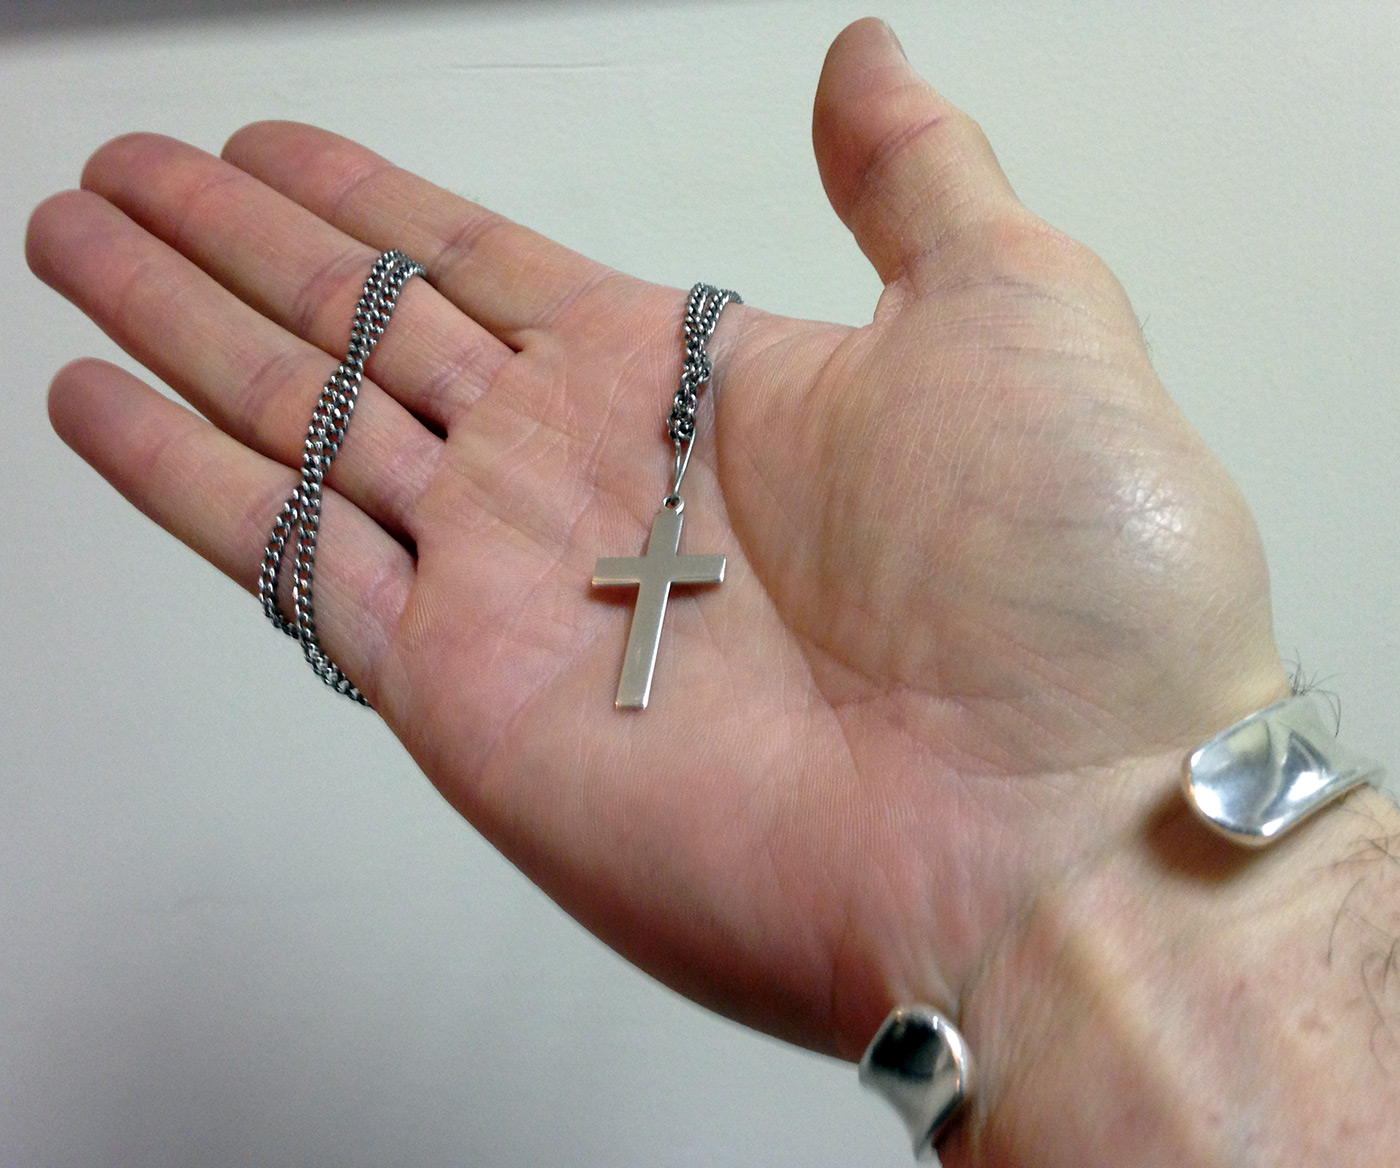 Hand holding a crucifix/cross necklace.